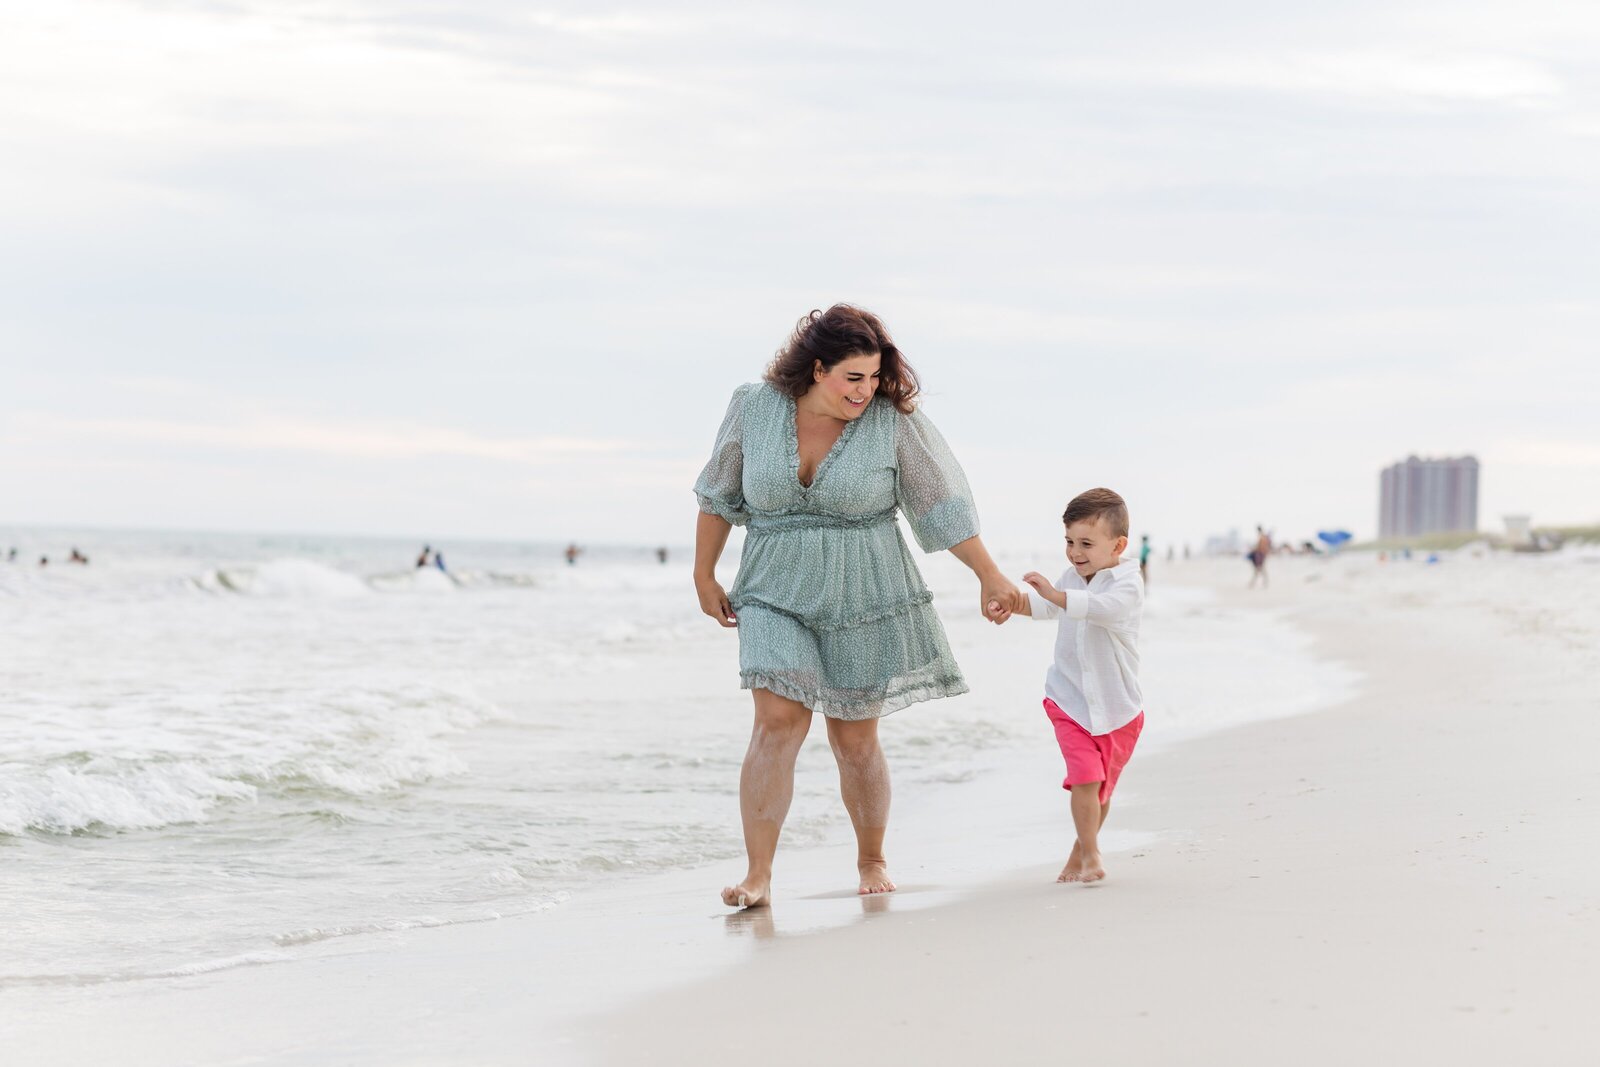 Pensacola Beach vacation family photo session . Mom walking down the beach holding son's hand.